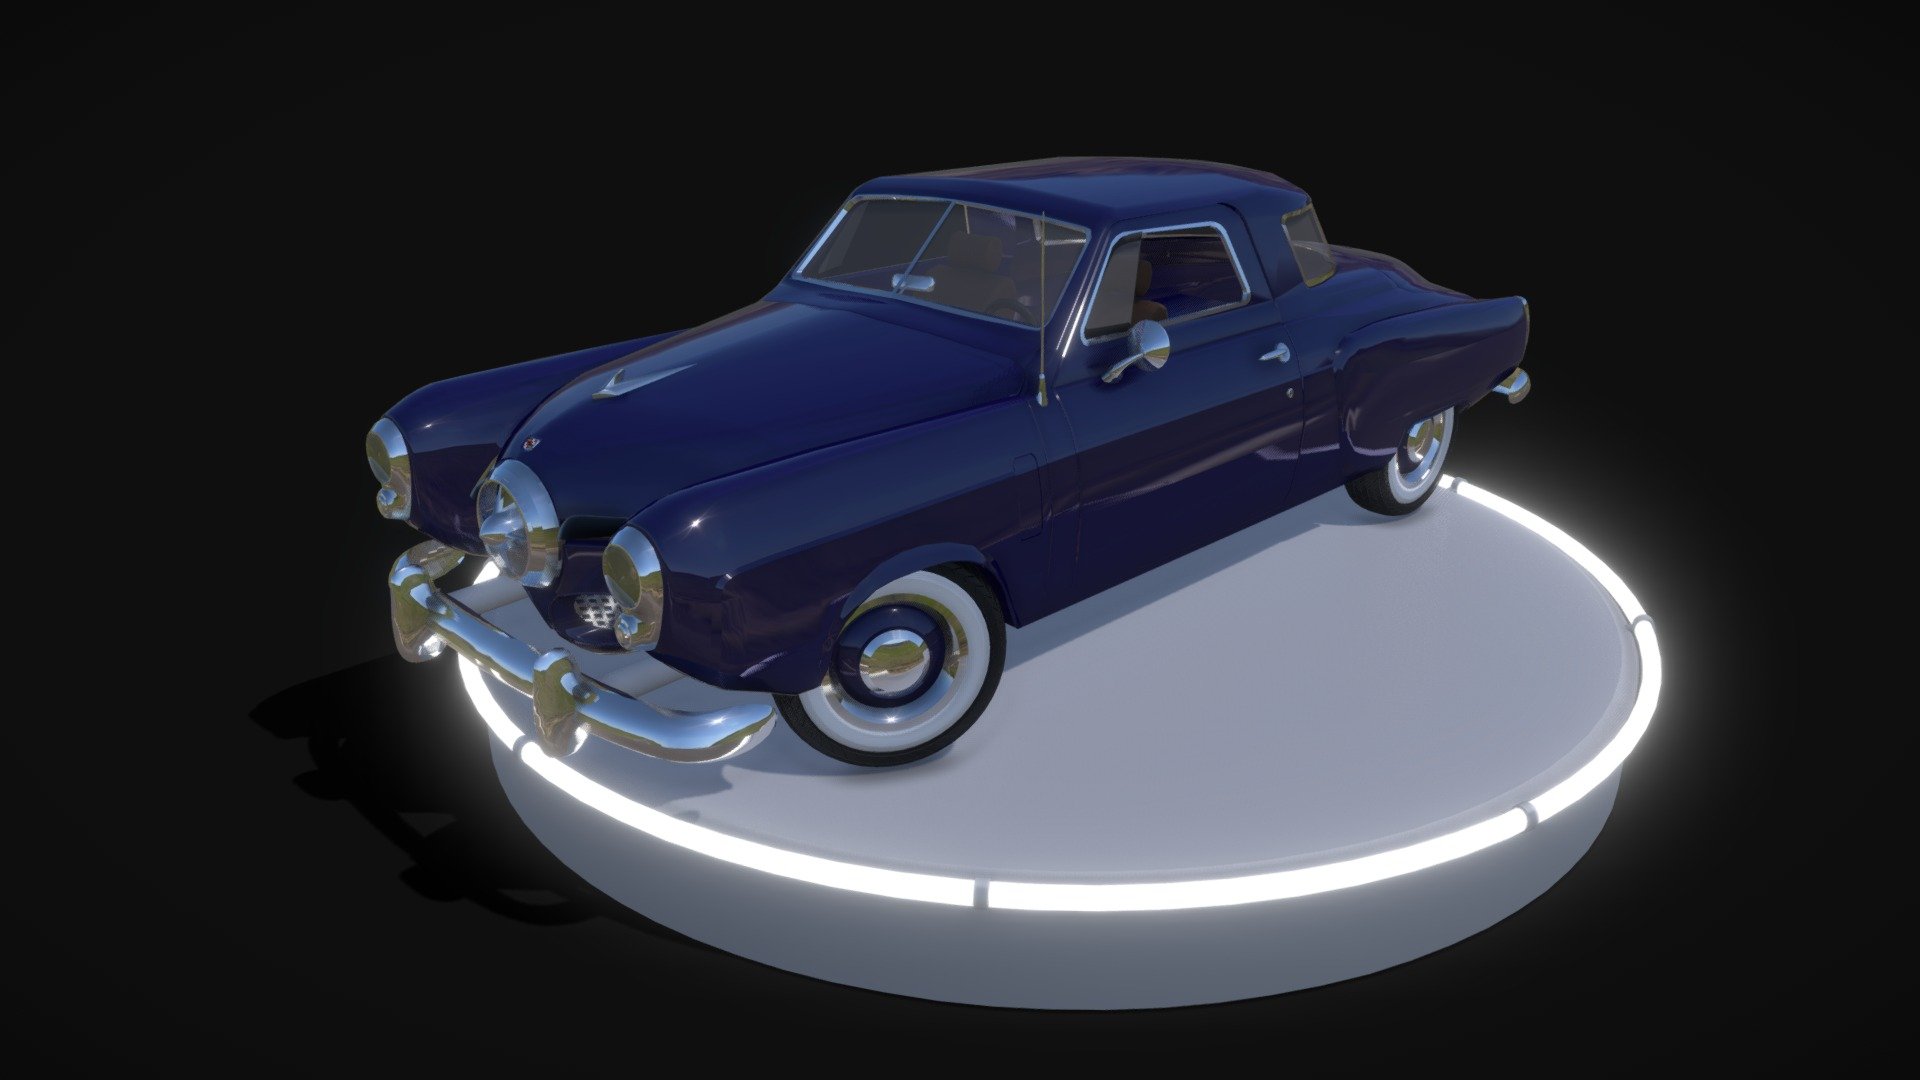 An old-fashioned type car, A 1951 Bullet-Nose Starlight Coupe Studebaker. Simplistic interior but highly realistic exterior. Wheel meshes are seperate and spinnable 3d model